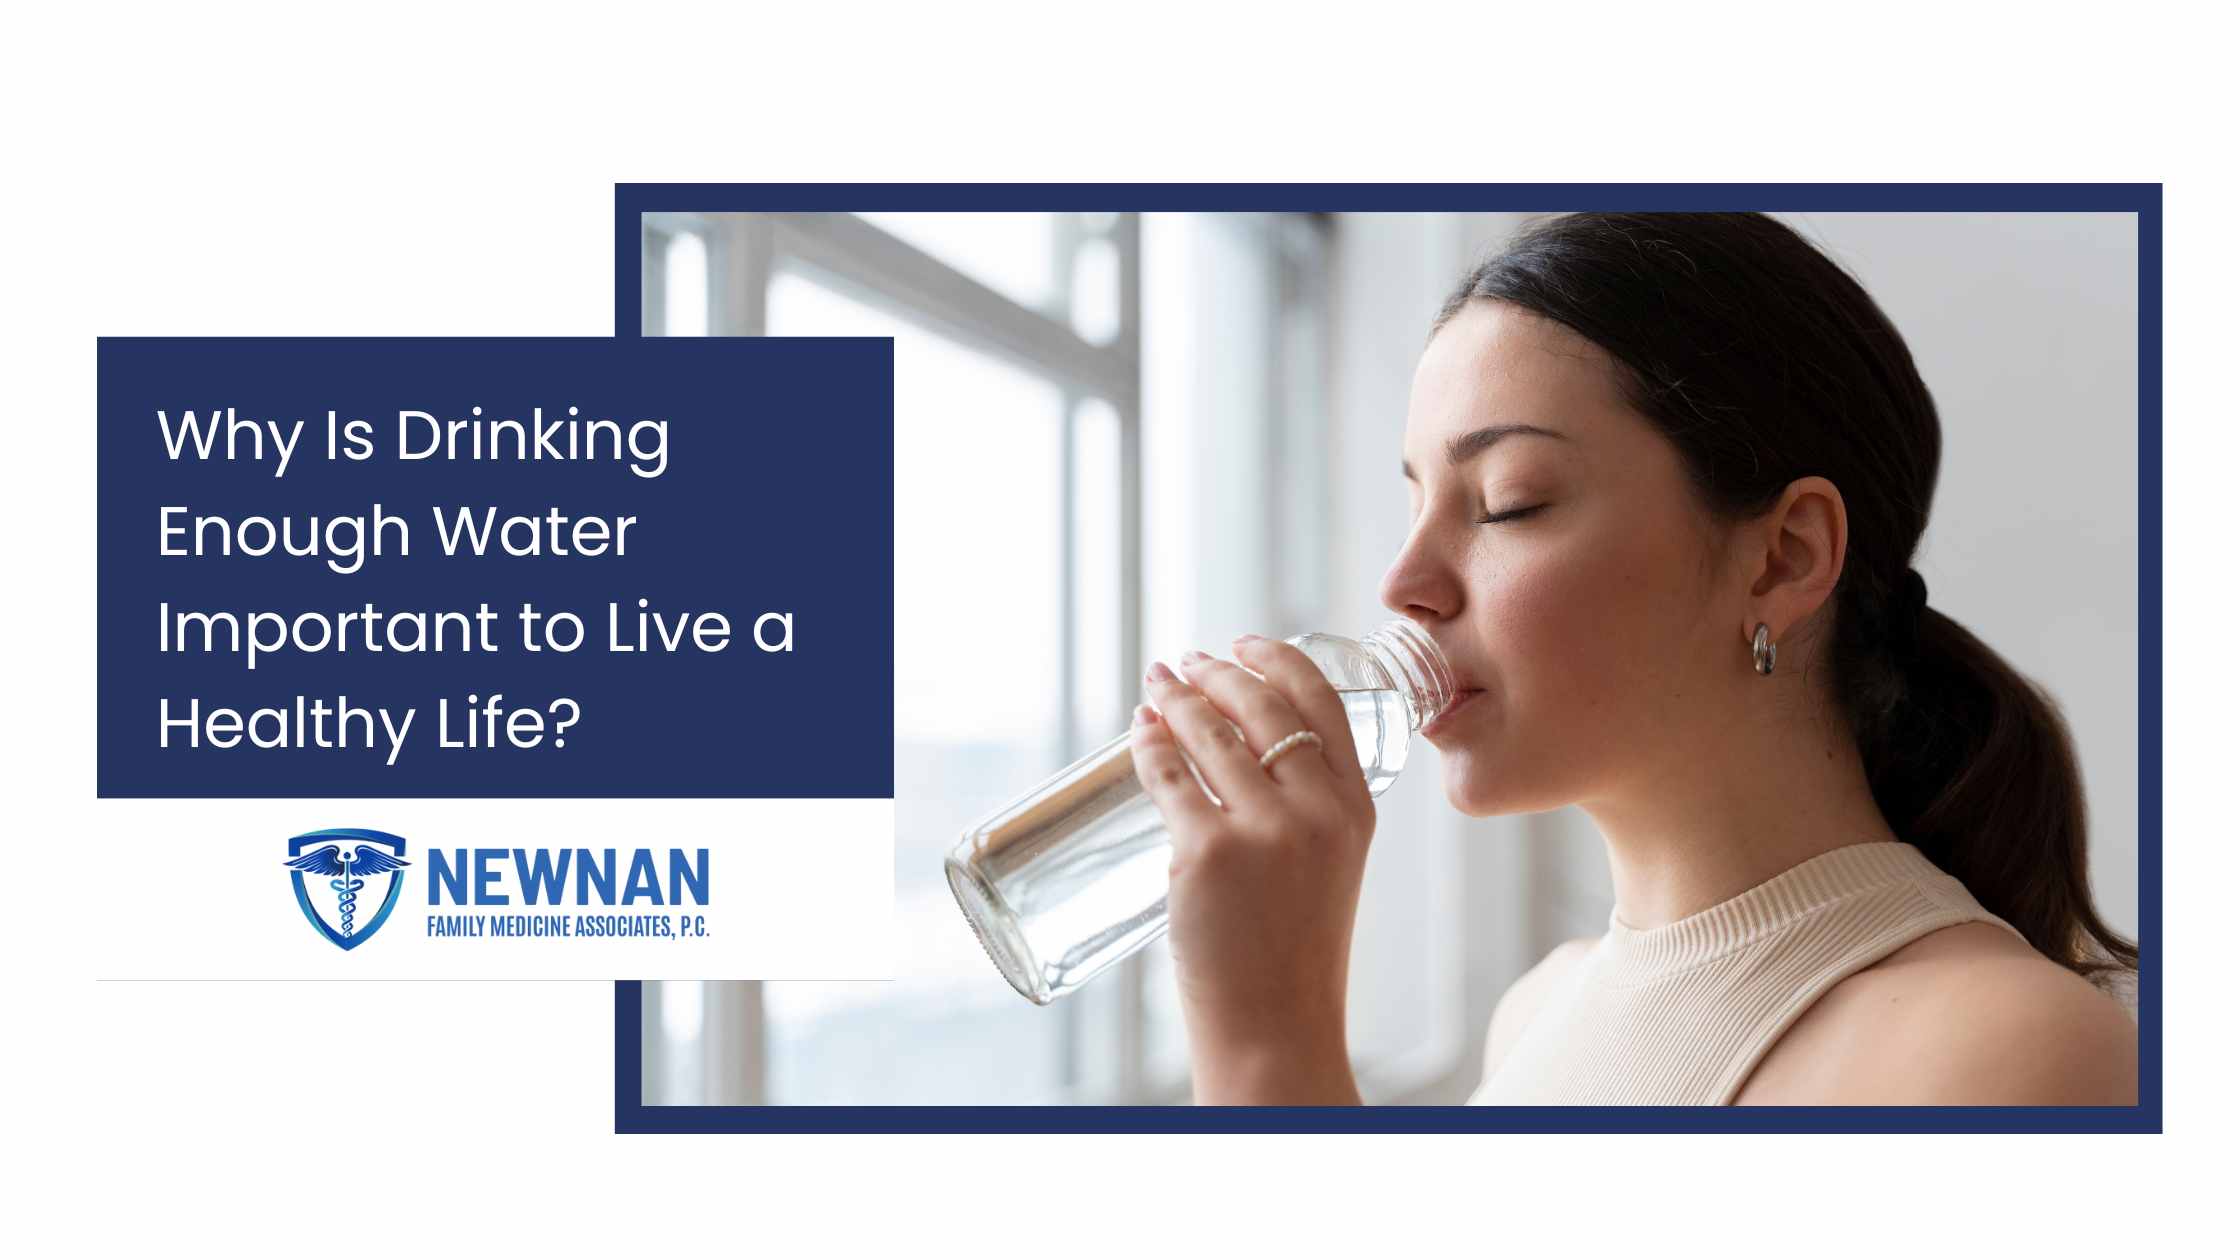 Why is Drinking Enough Water Important to Live a Healthy Life?